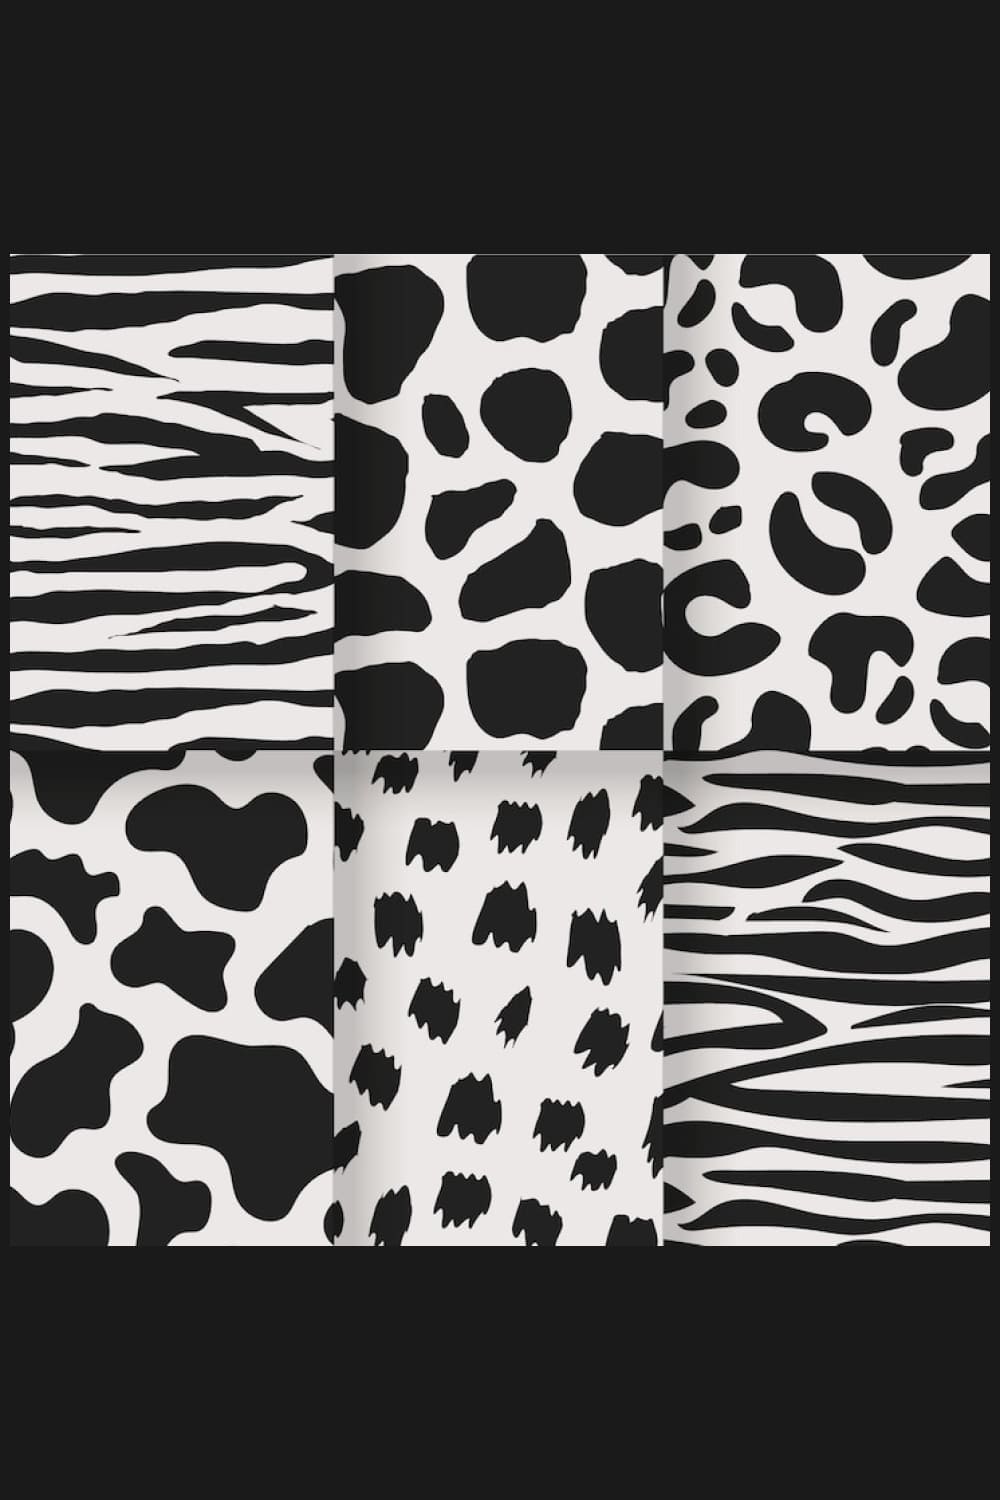 Coollage with Black and White Animal Prints.